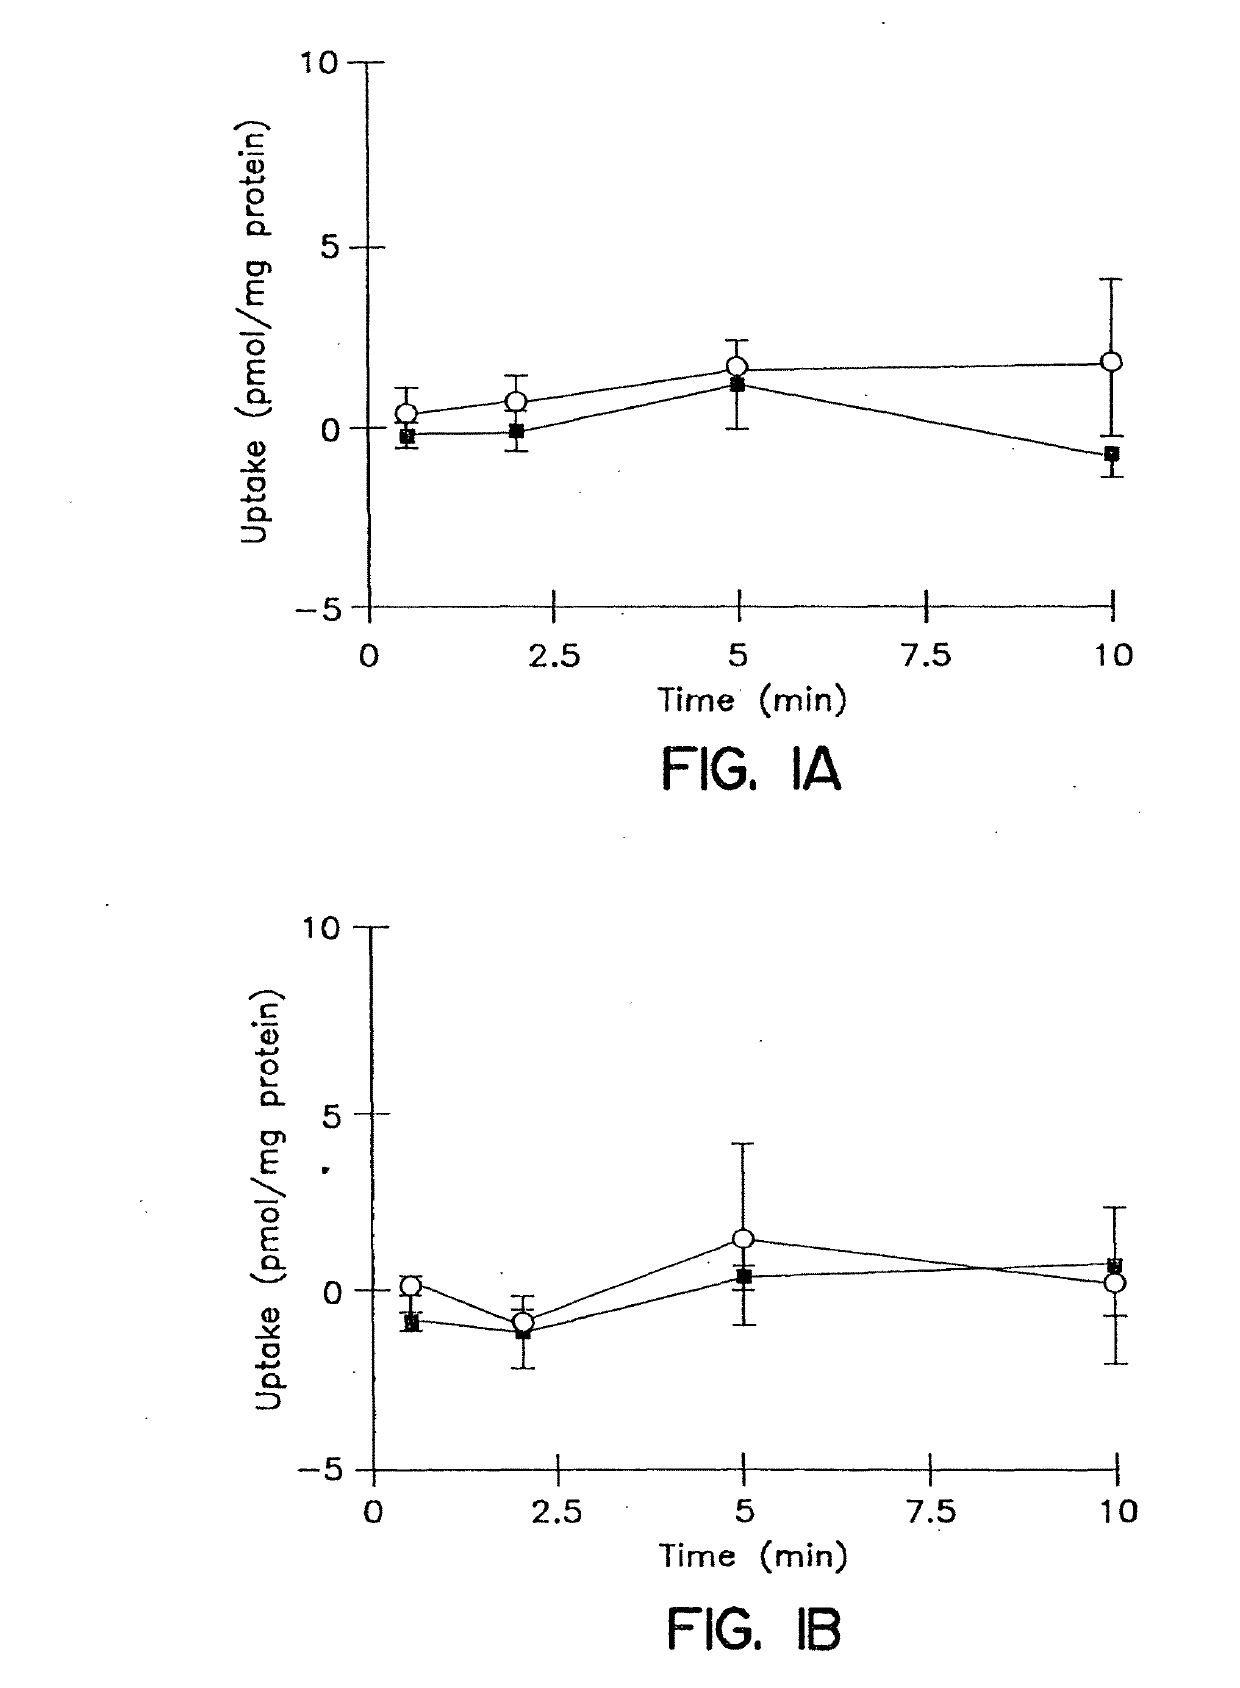 Method for inhibiting expression of a protein in a hepatocyte